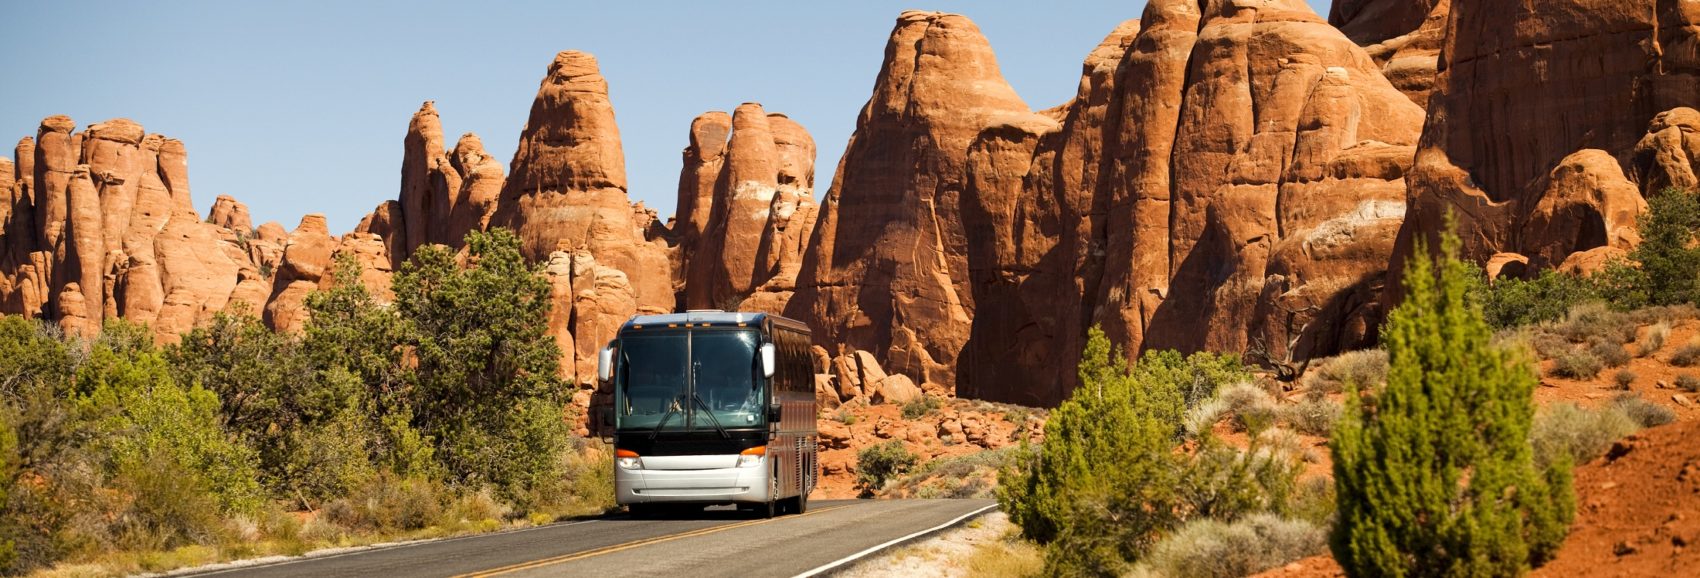 Southwest USA red rock landscape escorted tour in Arches National Park near Moab Utah